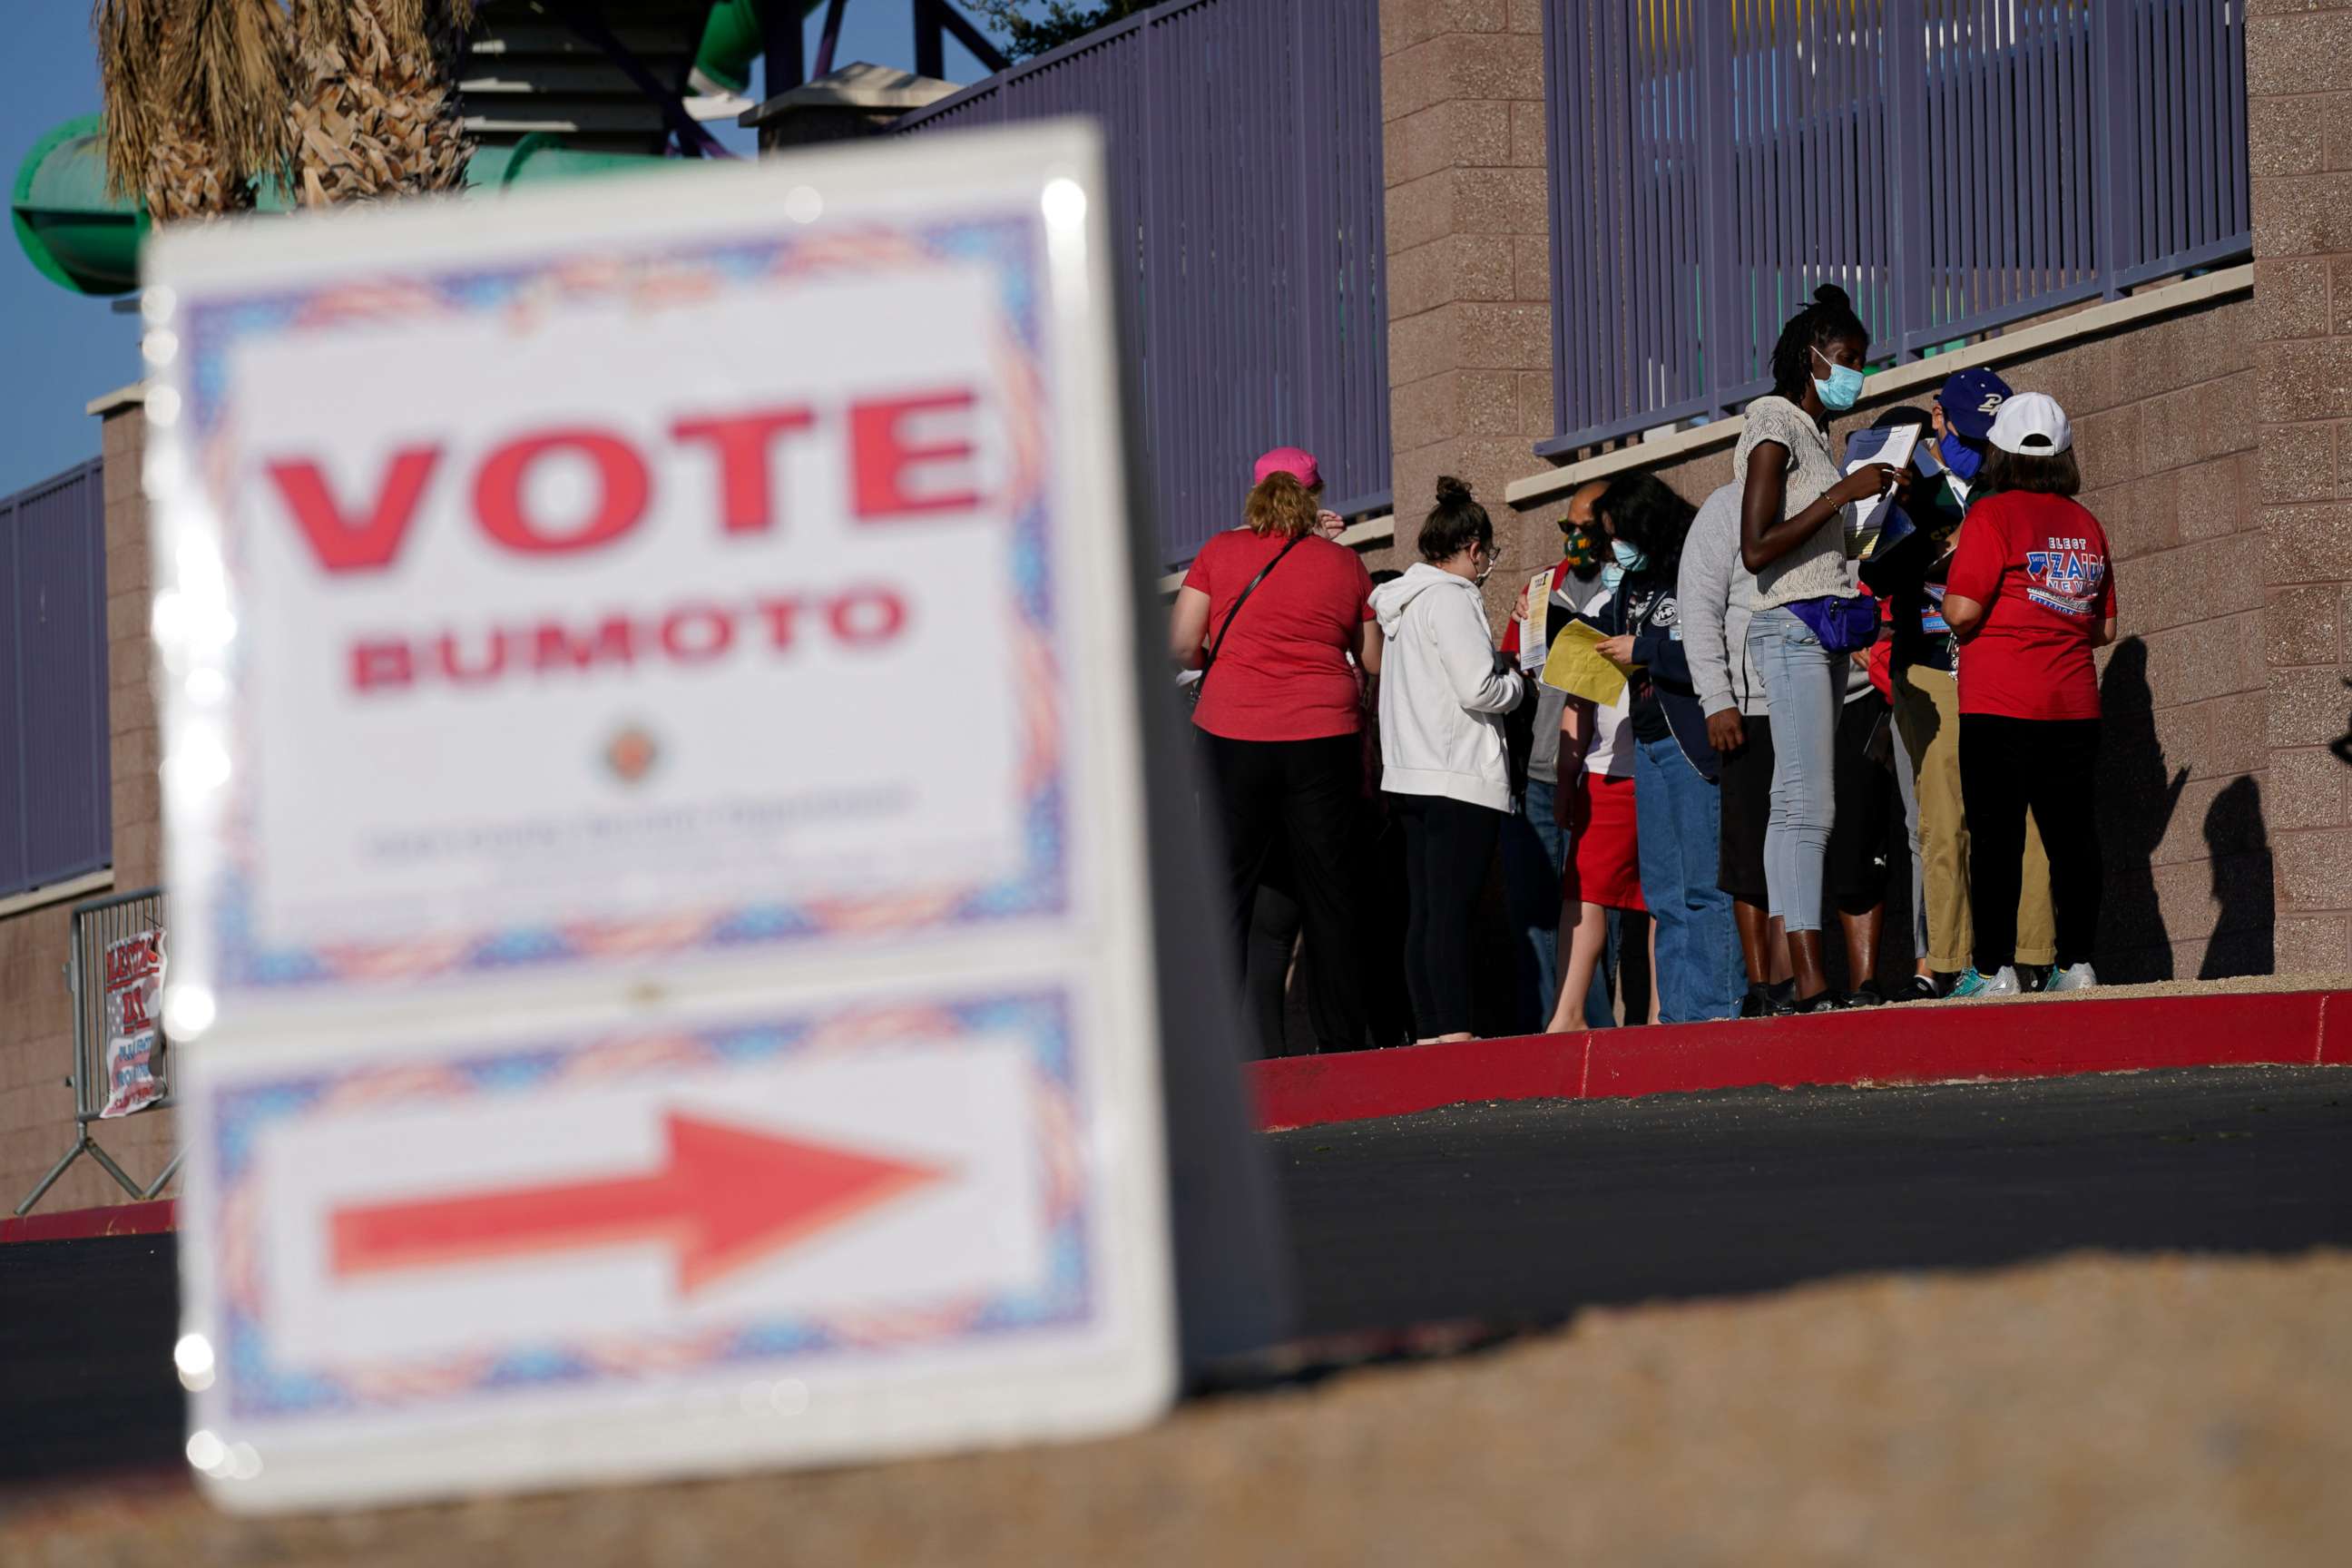 PHOTO: People wait in line to vote at a polling place on Election Day, Nov. 3, 2020, in Las Vegas.